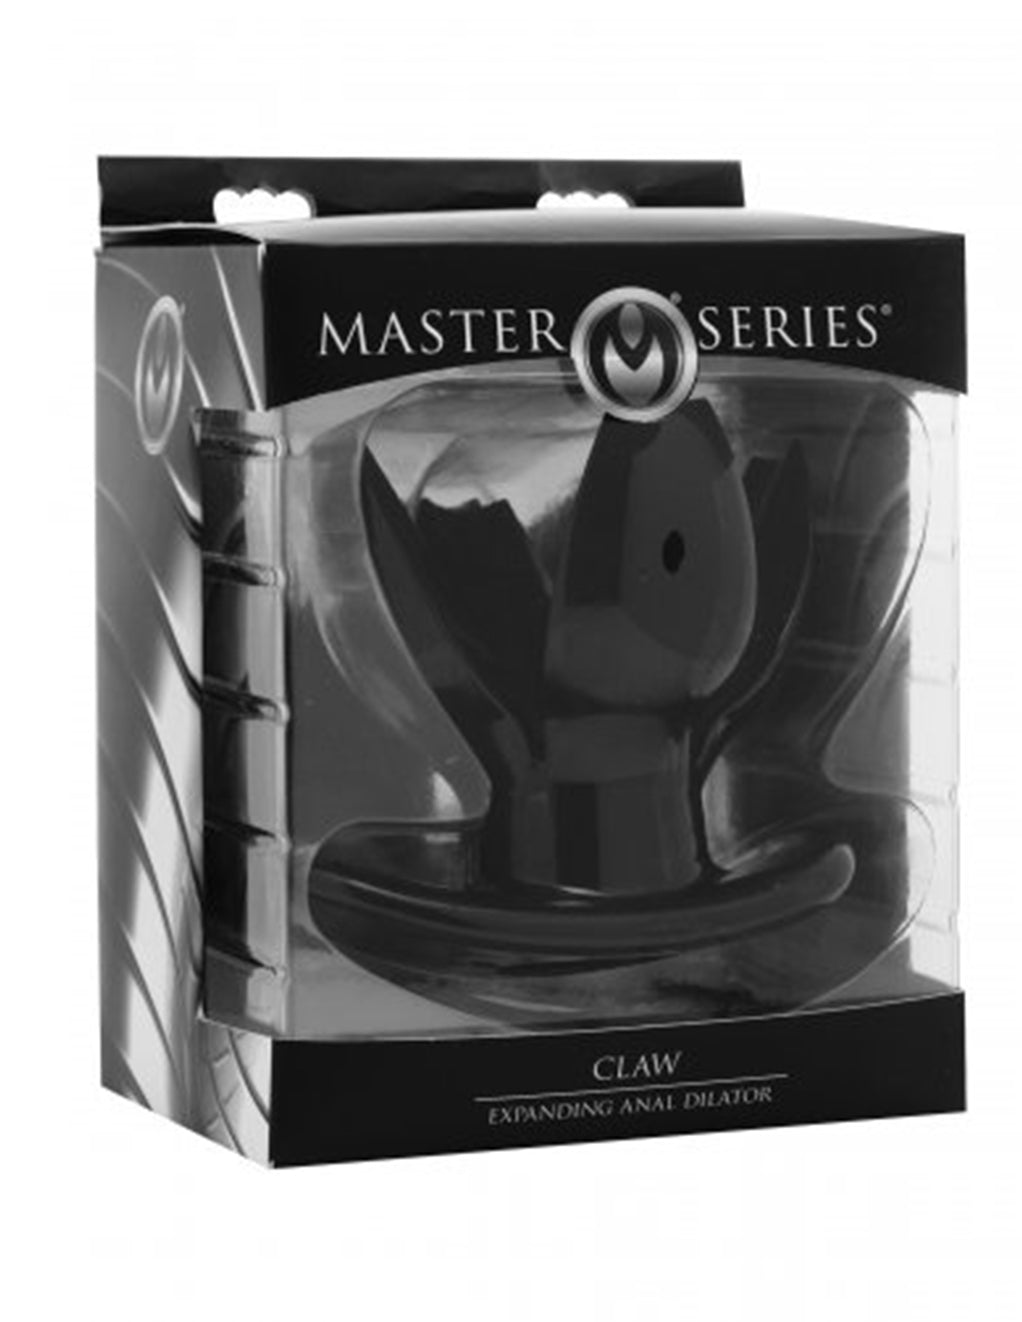 Master Series Claw Expanding Anal Dilator- Package